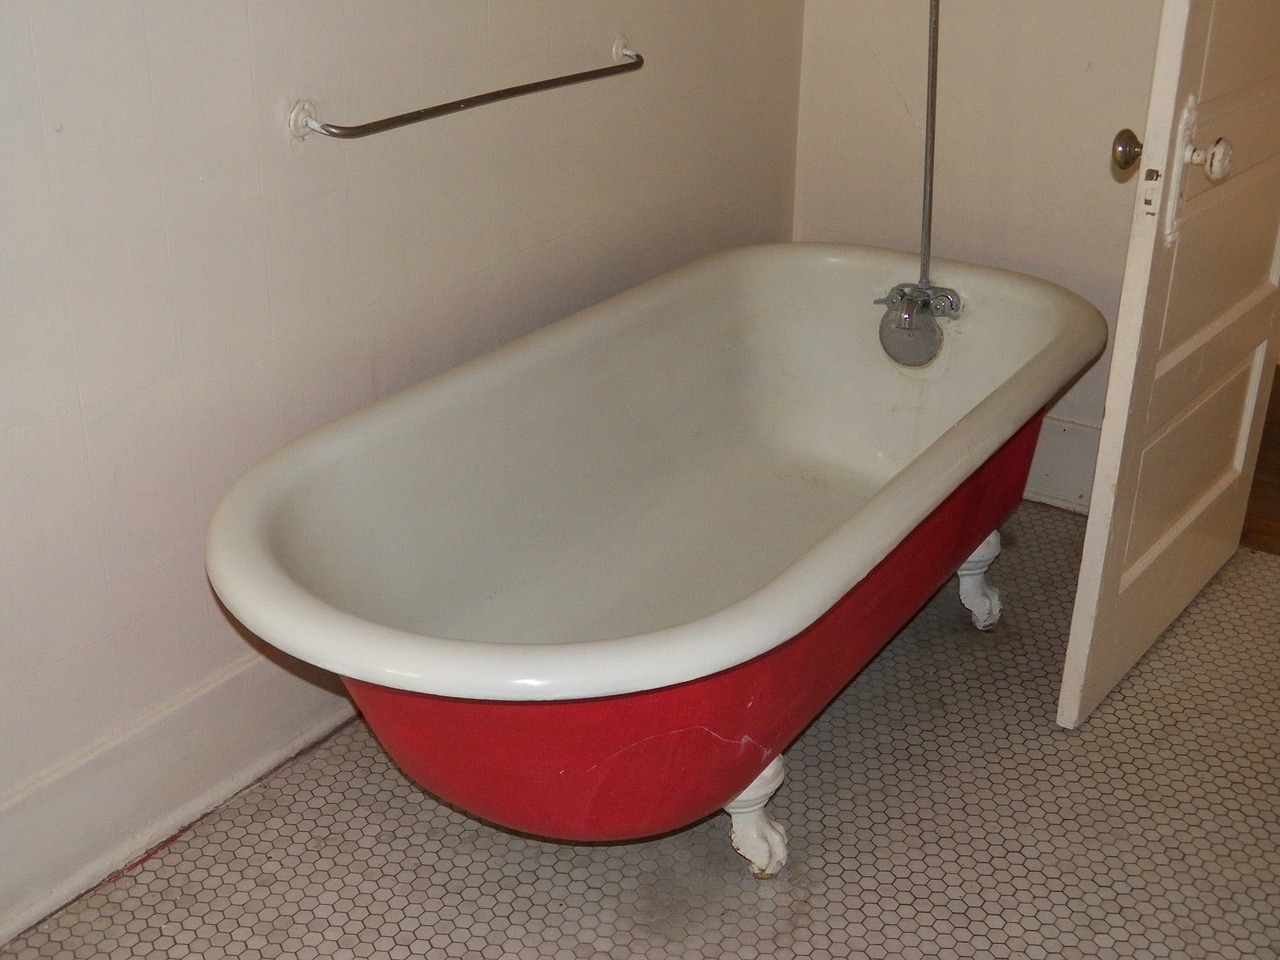 Repair A Ling Tub Terry S Plumbing, How To Fix A Refinished Bathtub